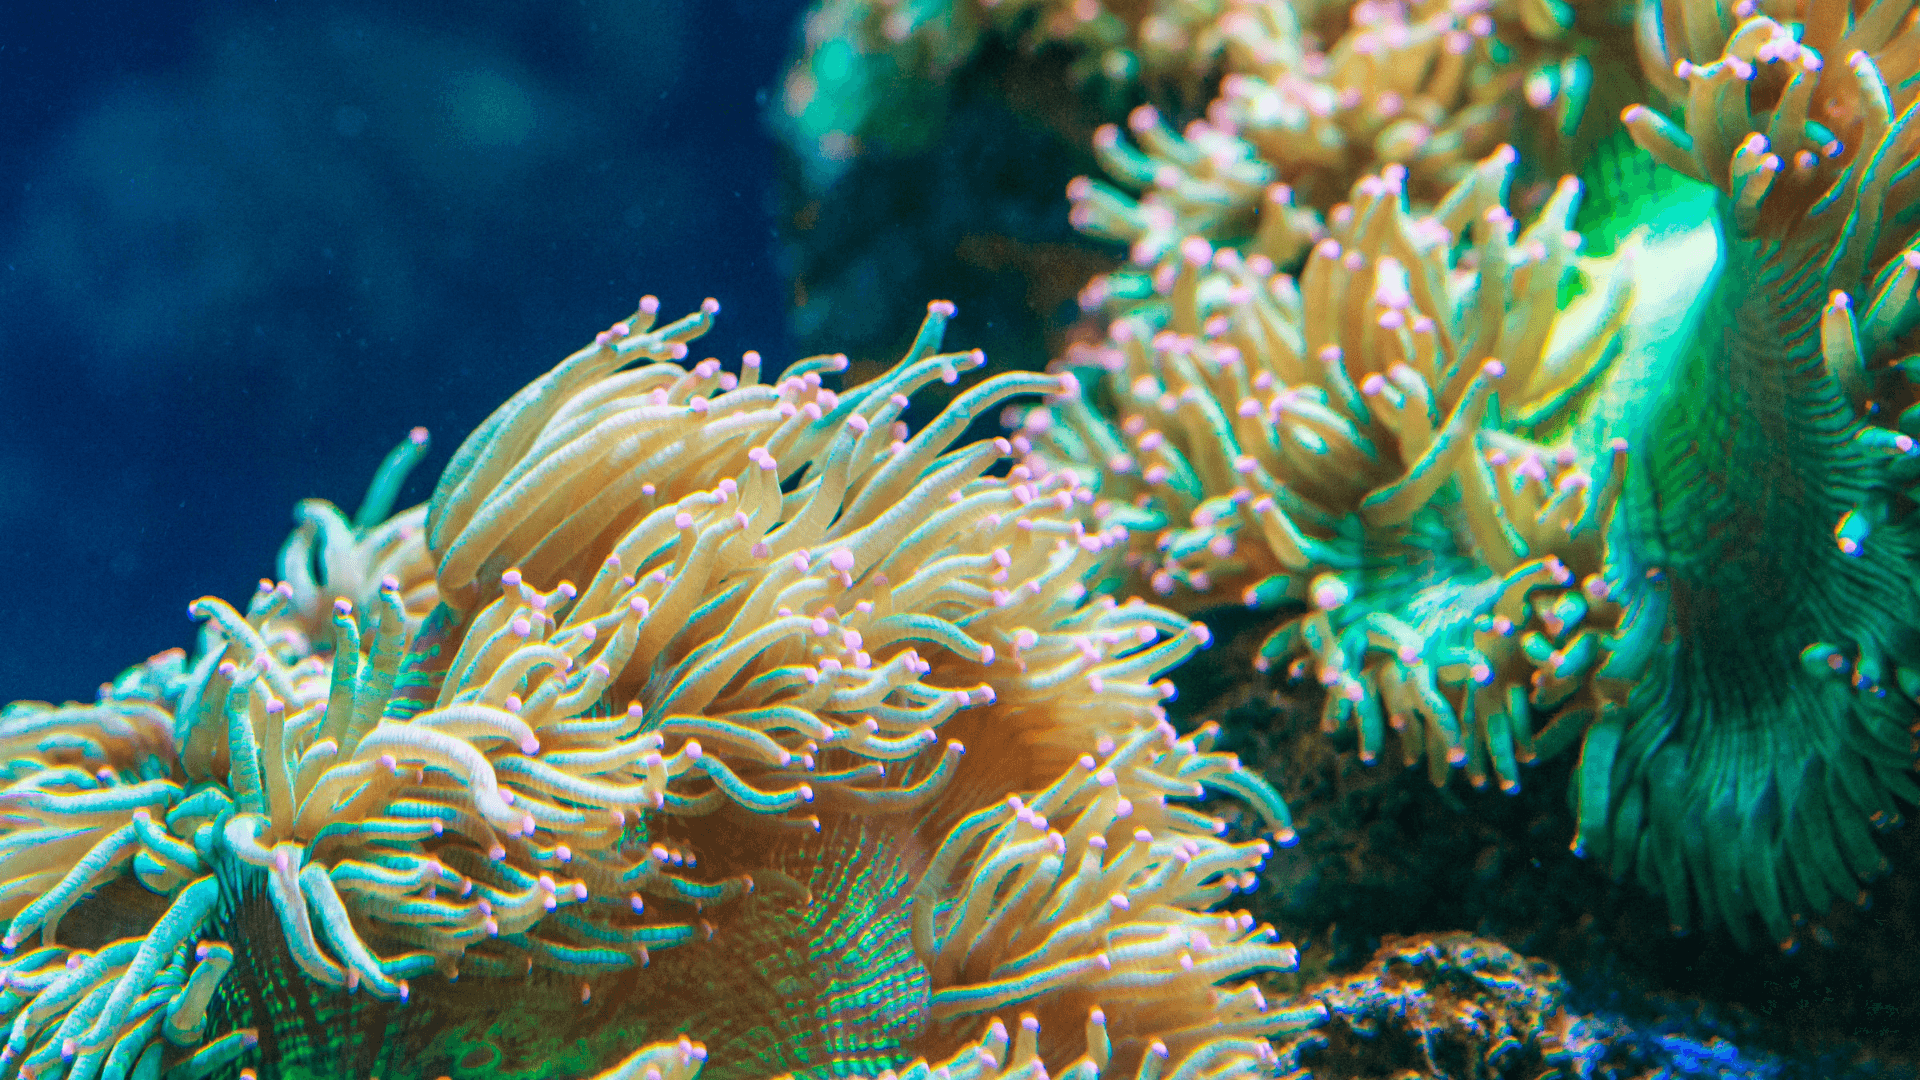 A photo of Long Tentacle Anemone